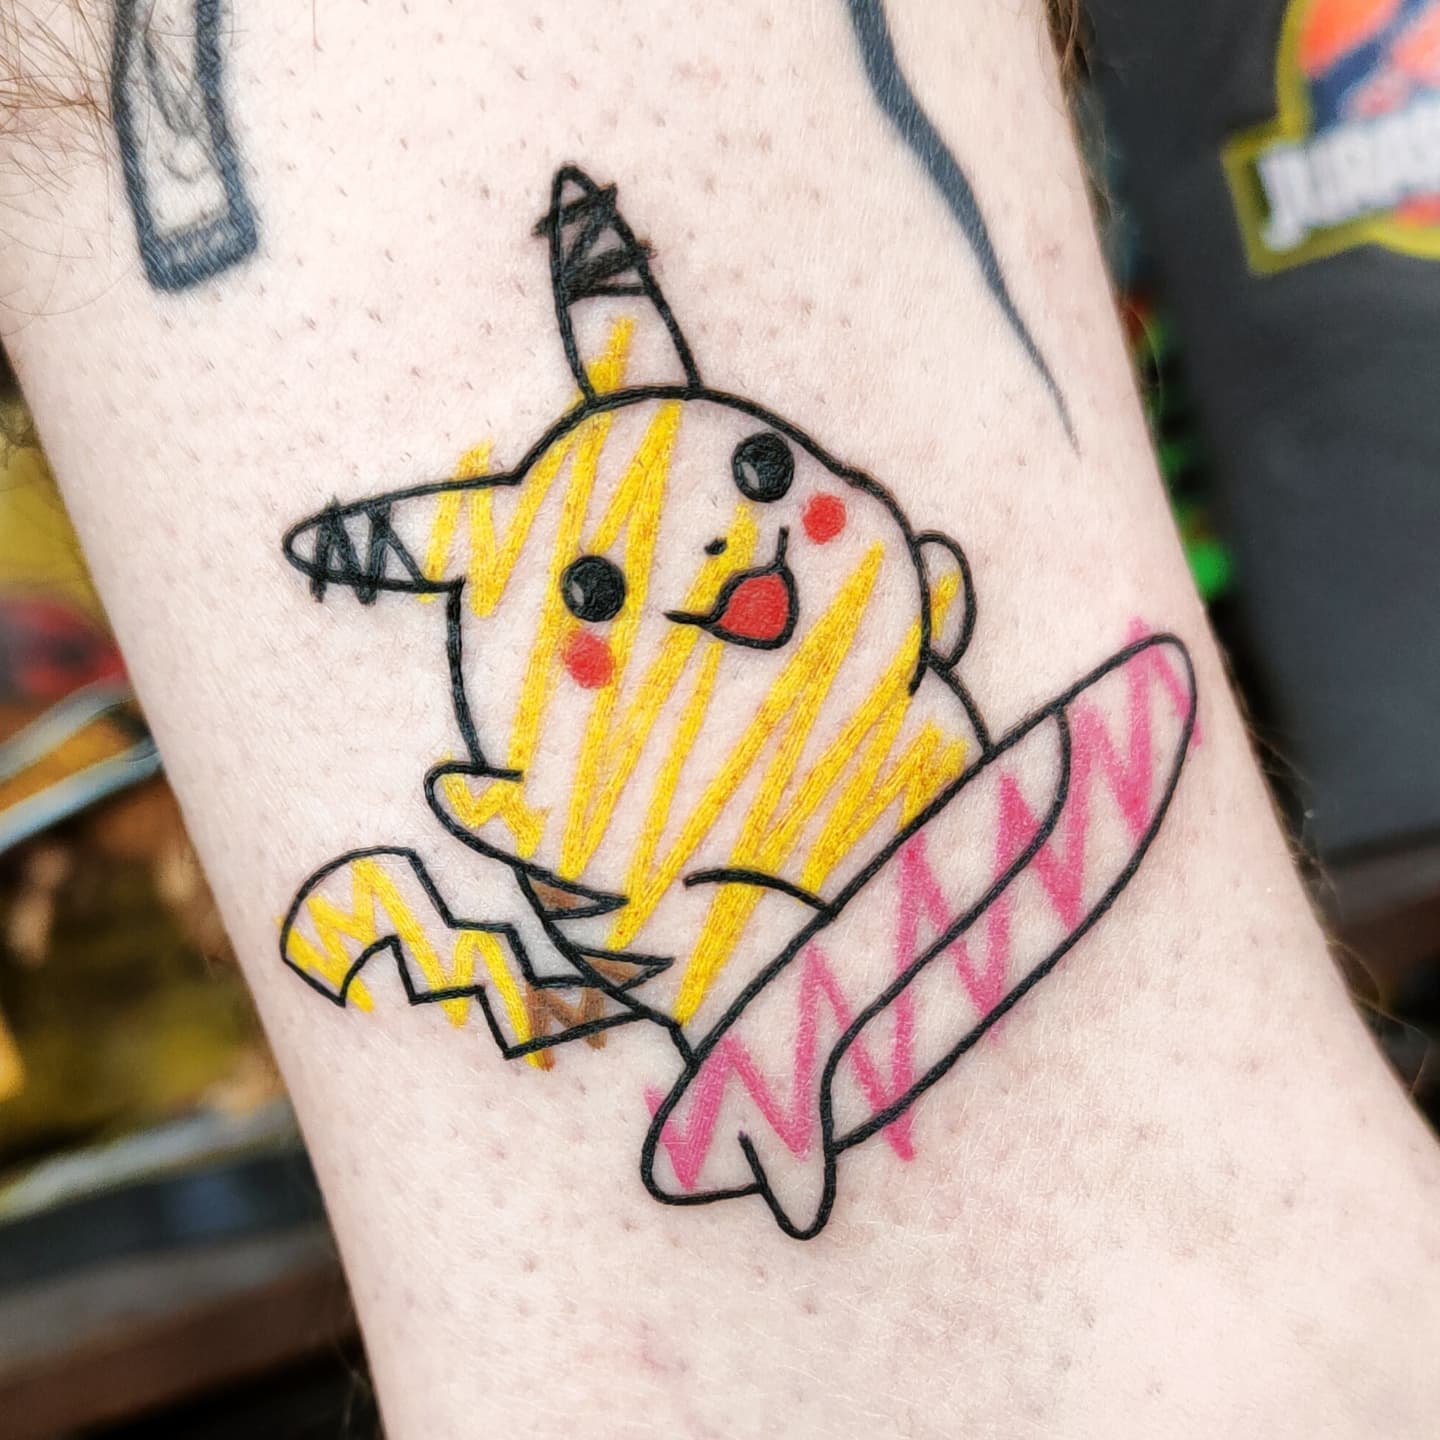 Being a yellow rodent-like creature who can summon electricity, Pikachu is one of the most popular characters of Pokemon, maybe the most popular one. In the tattoo above, a different type of coloring is used and this makes it cuter.